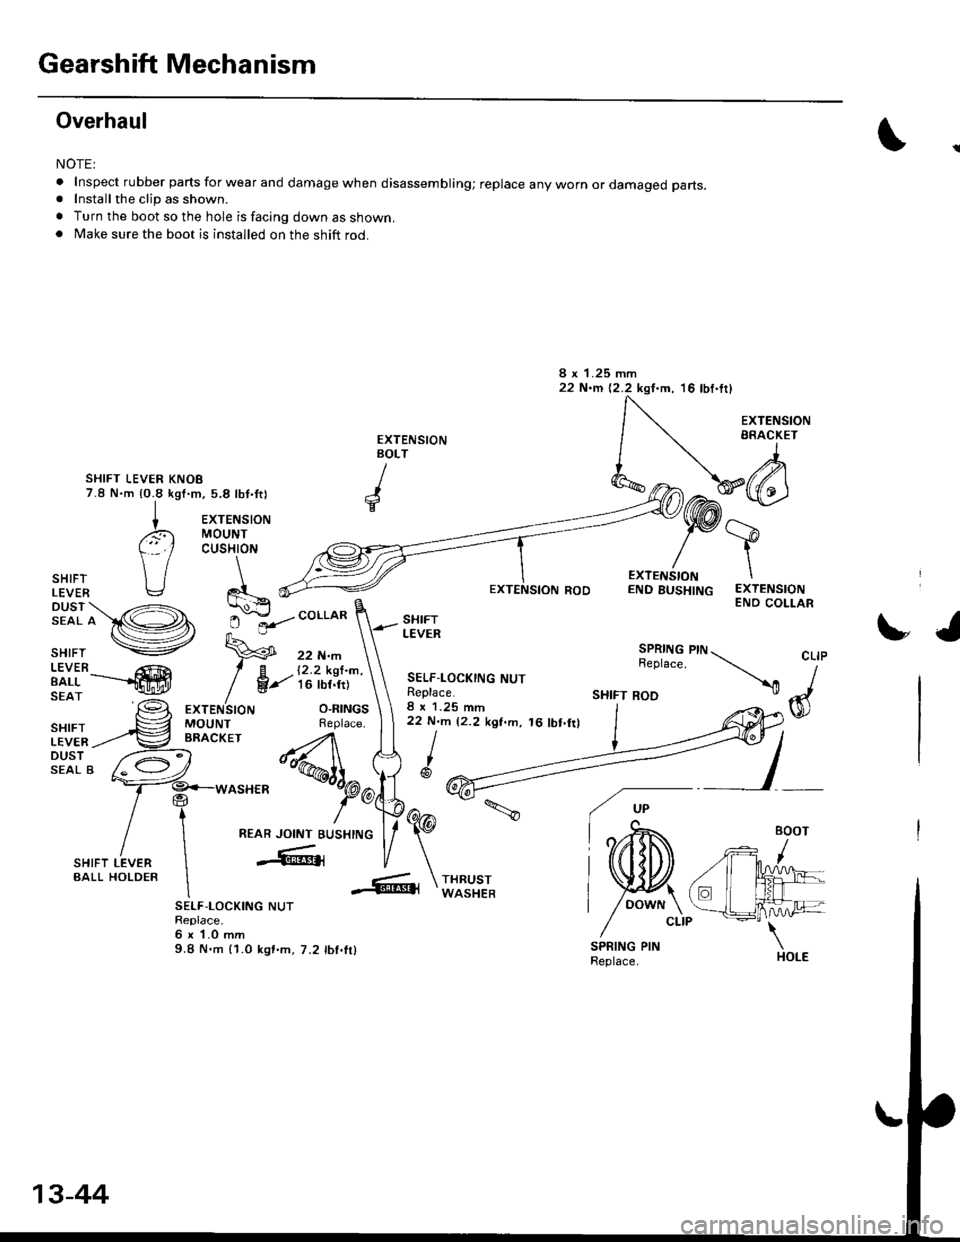 HONDA CIVIC 2000 6.G Workshop Manual Gearshift Mechanism
Overhaul
NOTE:
.Inspectrubberpartsforwearanddamagewhendisassembling;replaceanywornordamagedparts.
. Install the clip as shown.
. Turn the boot so the hole is facing down as shown..